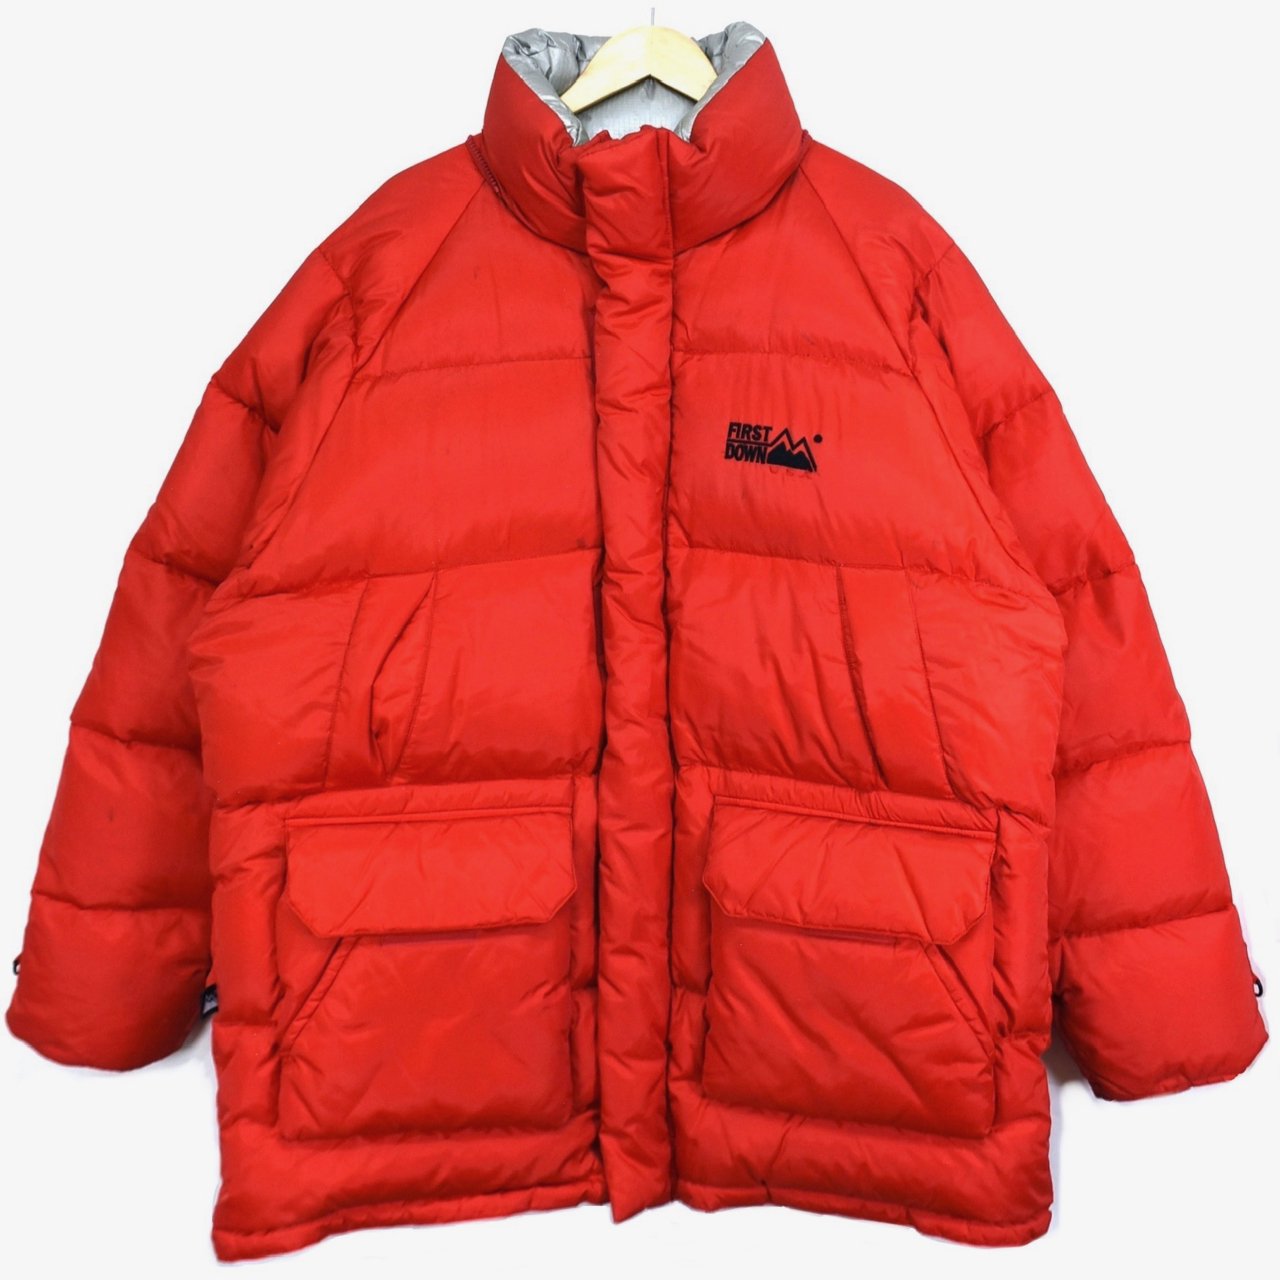 1990s FIRST DOWN Down jacket XL Red - MISSION WEB STORE